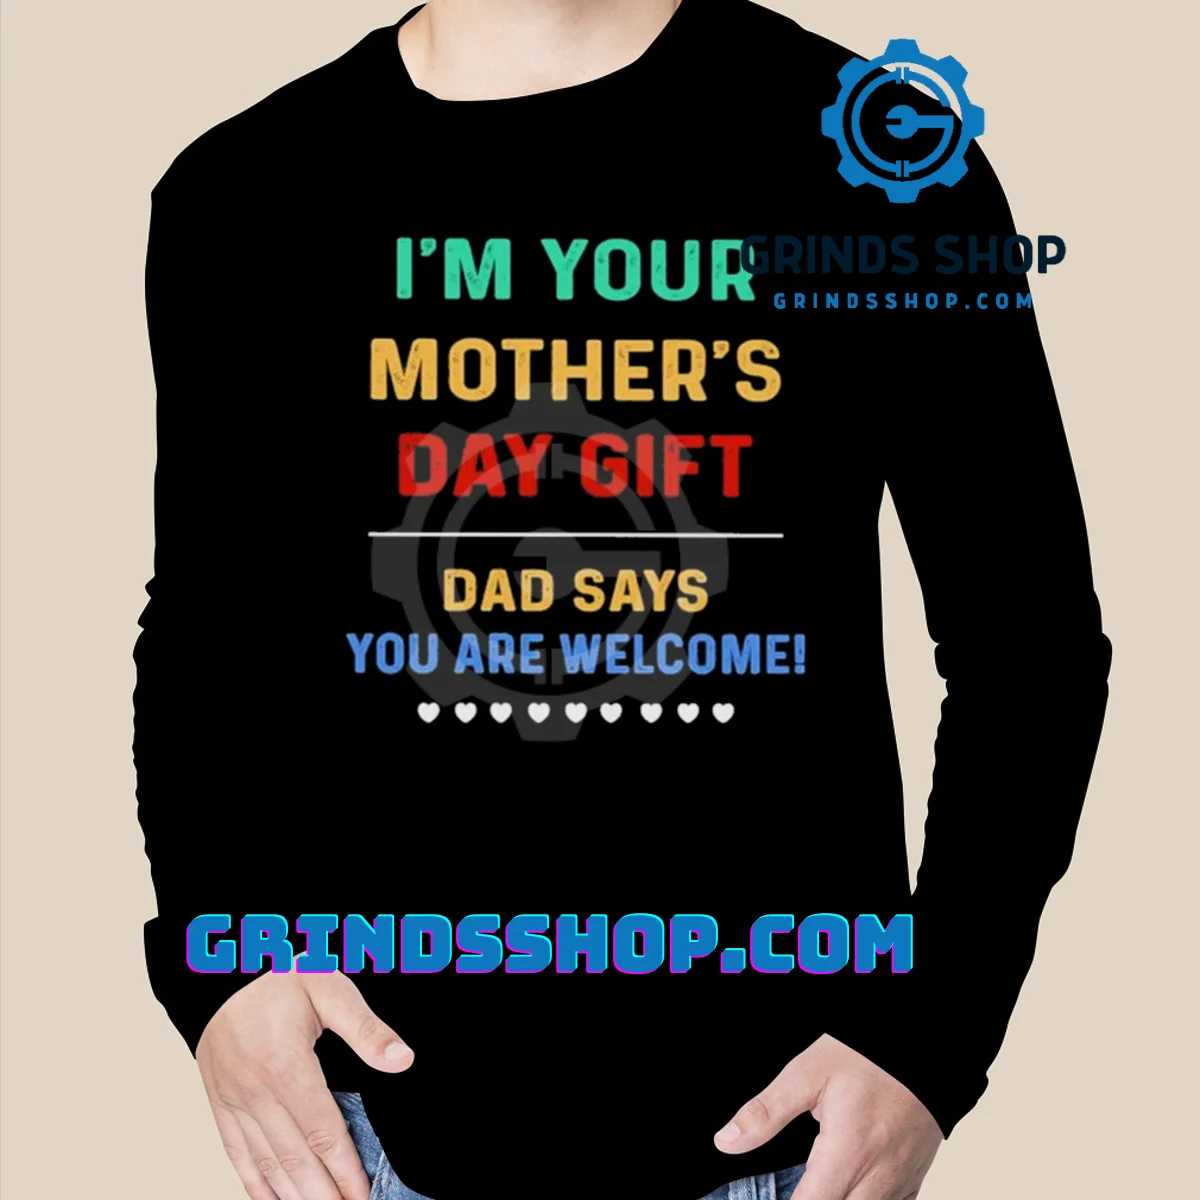 I’m Your Mother’s Day Gift Dad Says You Are Welcome shirt